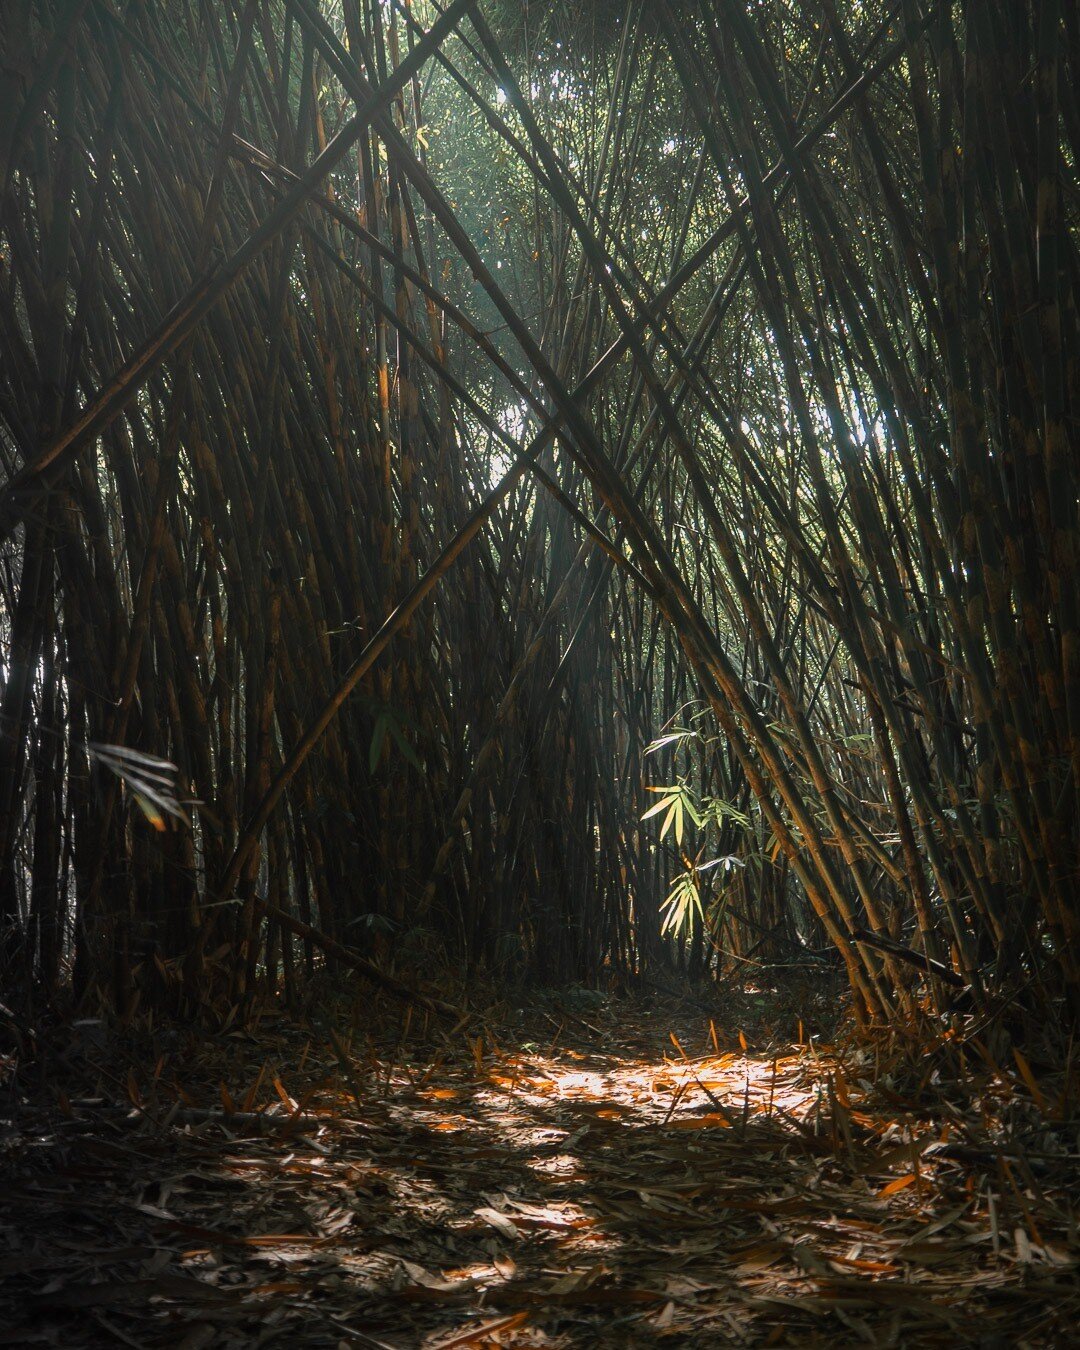 Following the light as we find our way through the misty Penglipuran bamboo forest where local villagers believe their ancestors started growing bamboo here many generations ago.

This is one of the biggest bamboo forests in Bali and this robust natu